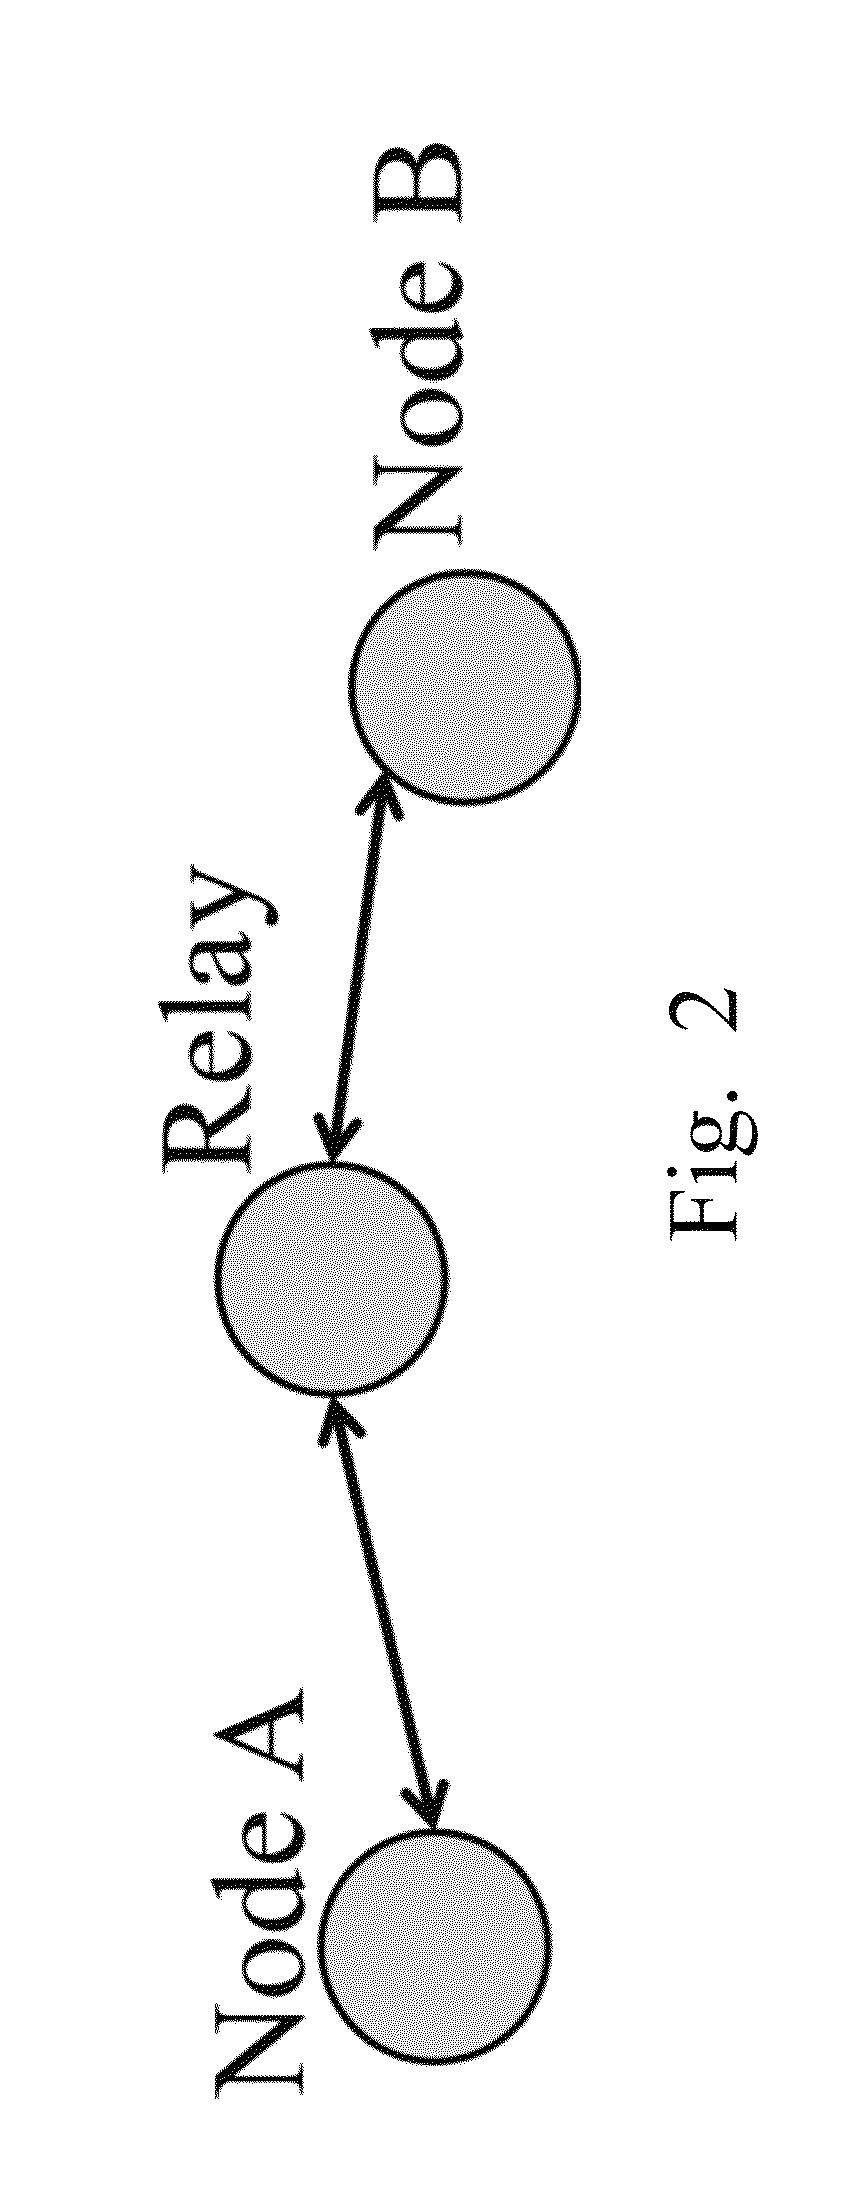 Systems and Methods for Creating, Managing and Communicating Users and Applications on Spontaneous Area Networks